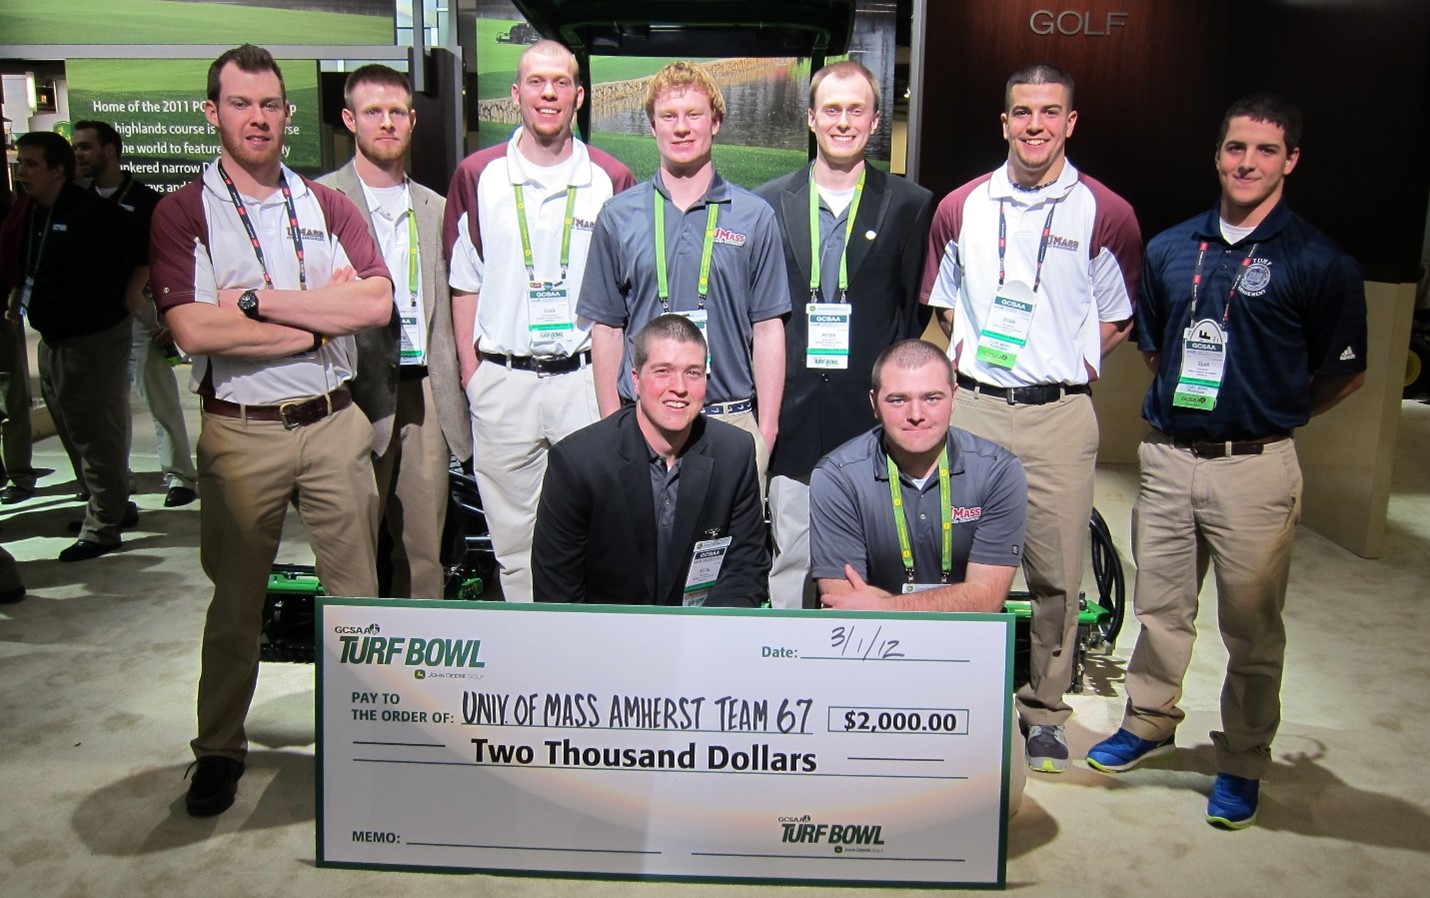 The 2nd place undergraduate team members of the 2012 GCSAA Turf Bowl competition.